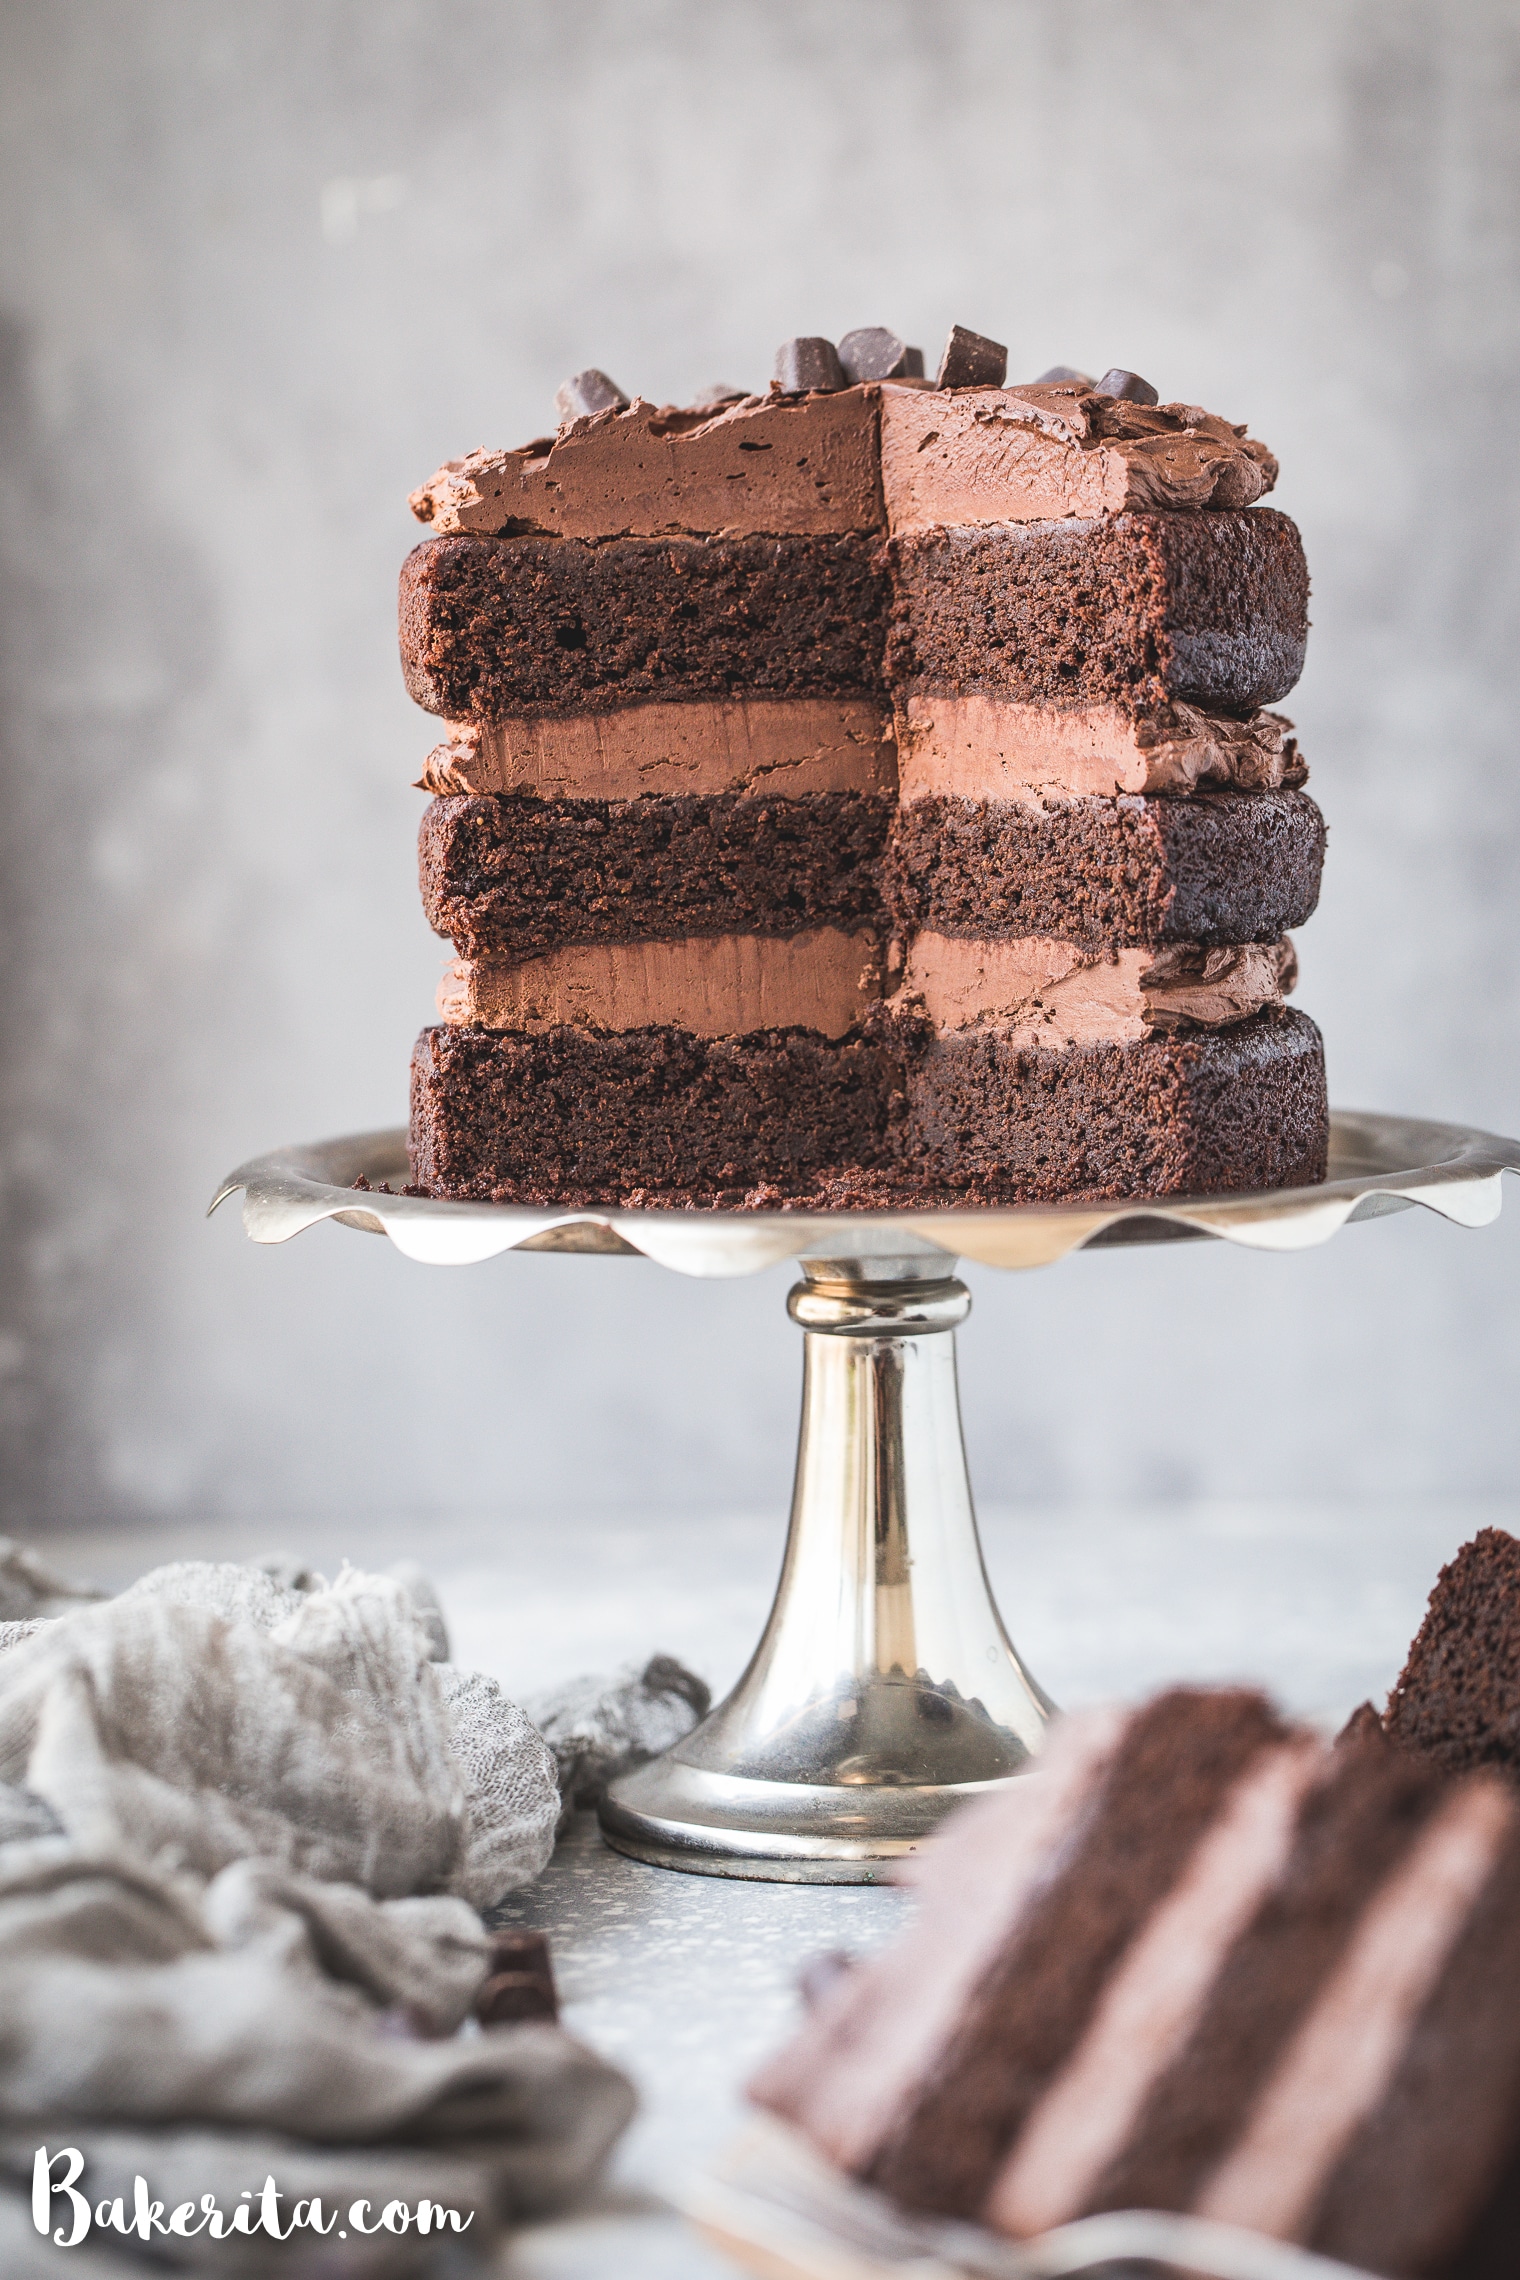 Paleo Chocolate Cake with Vegan Chocolate Ganache Frosting - a quick and easy cake recipe with a simple 2-ingredient frosting! This layer cake is gluten-free, paleo, dairy-free, and vegan, and it tastes as decadent as your favorite chocolate cake.